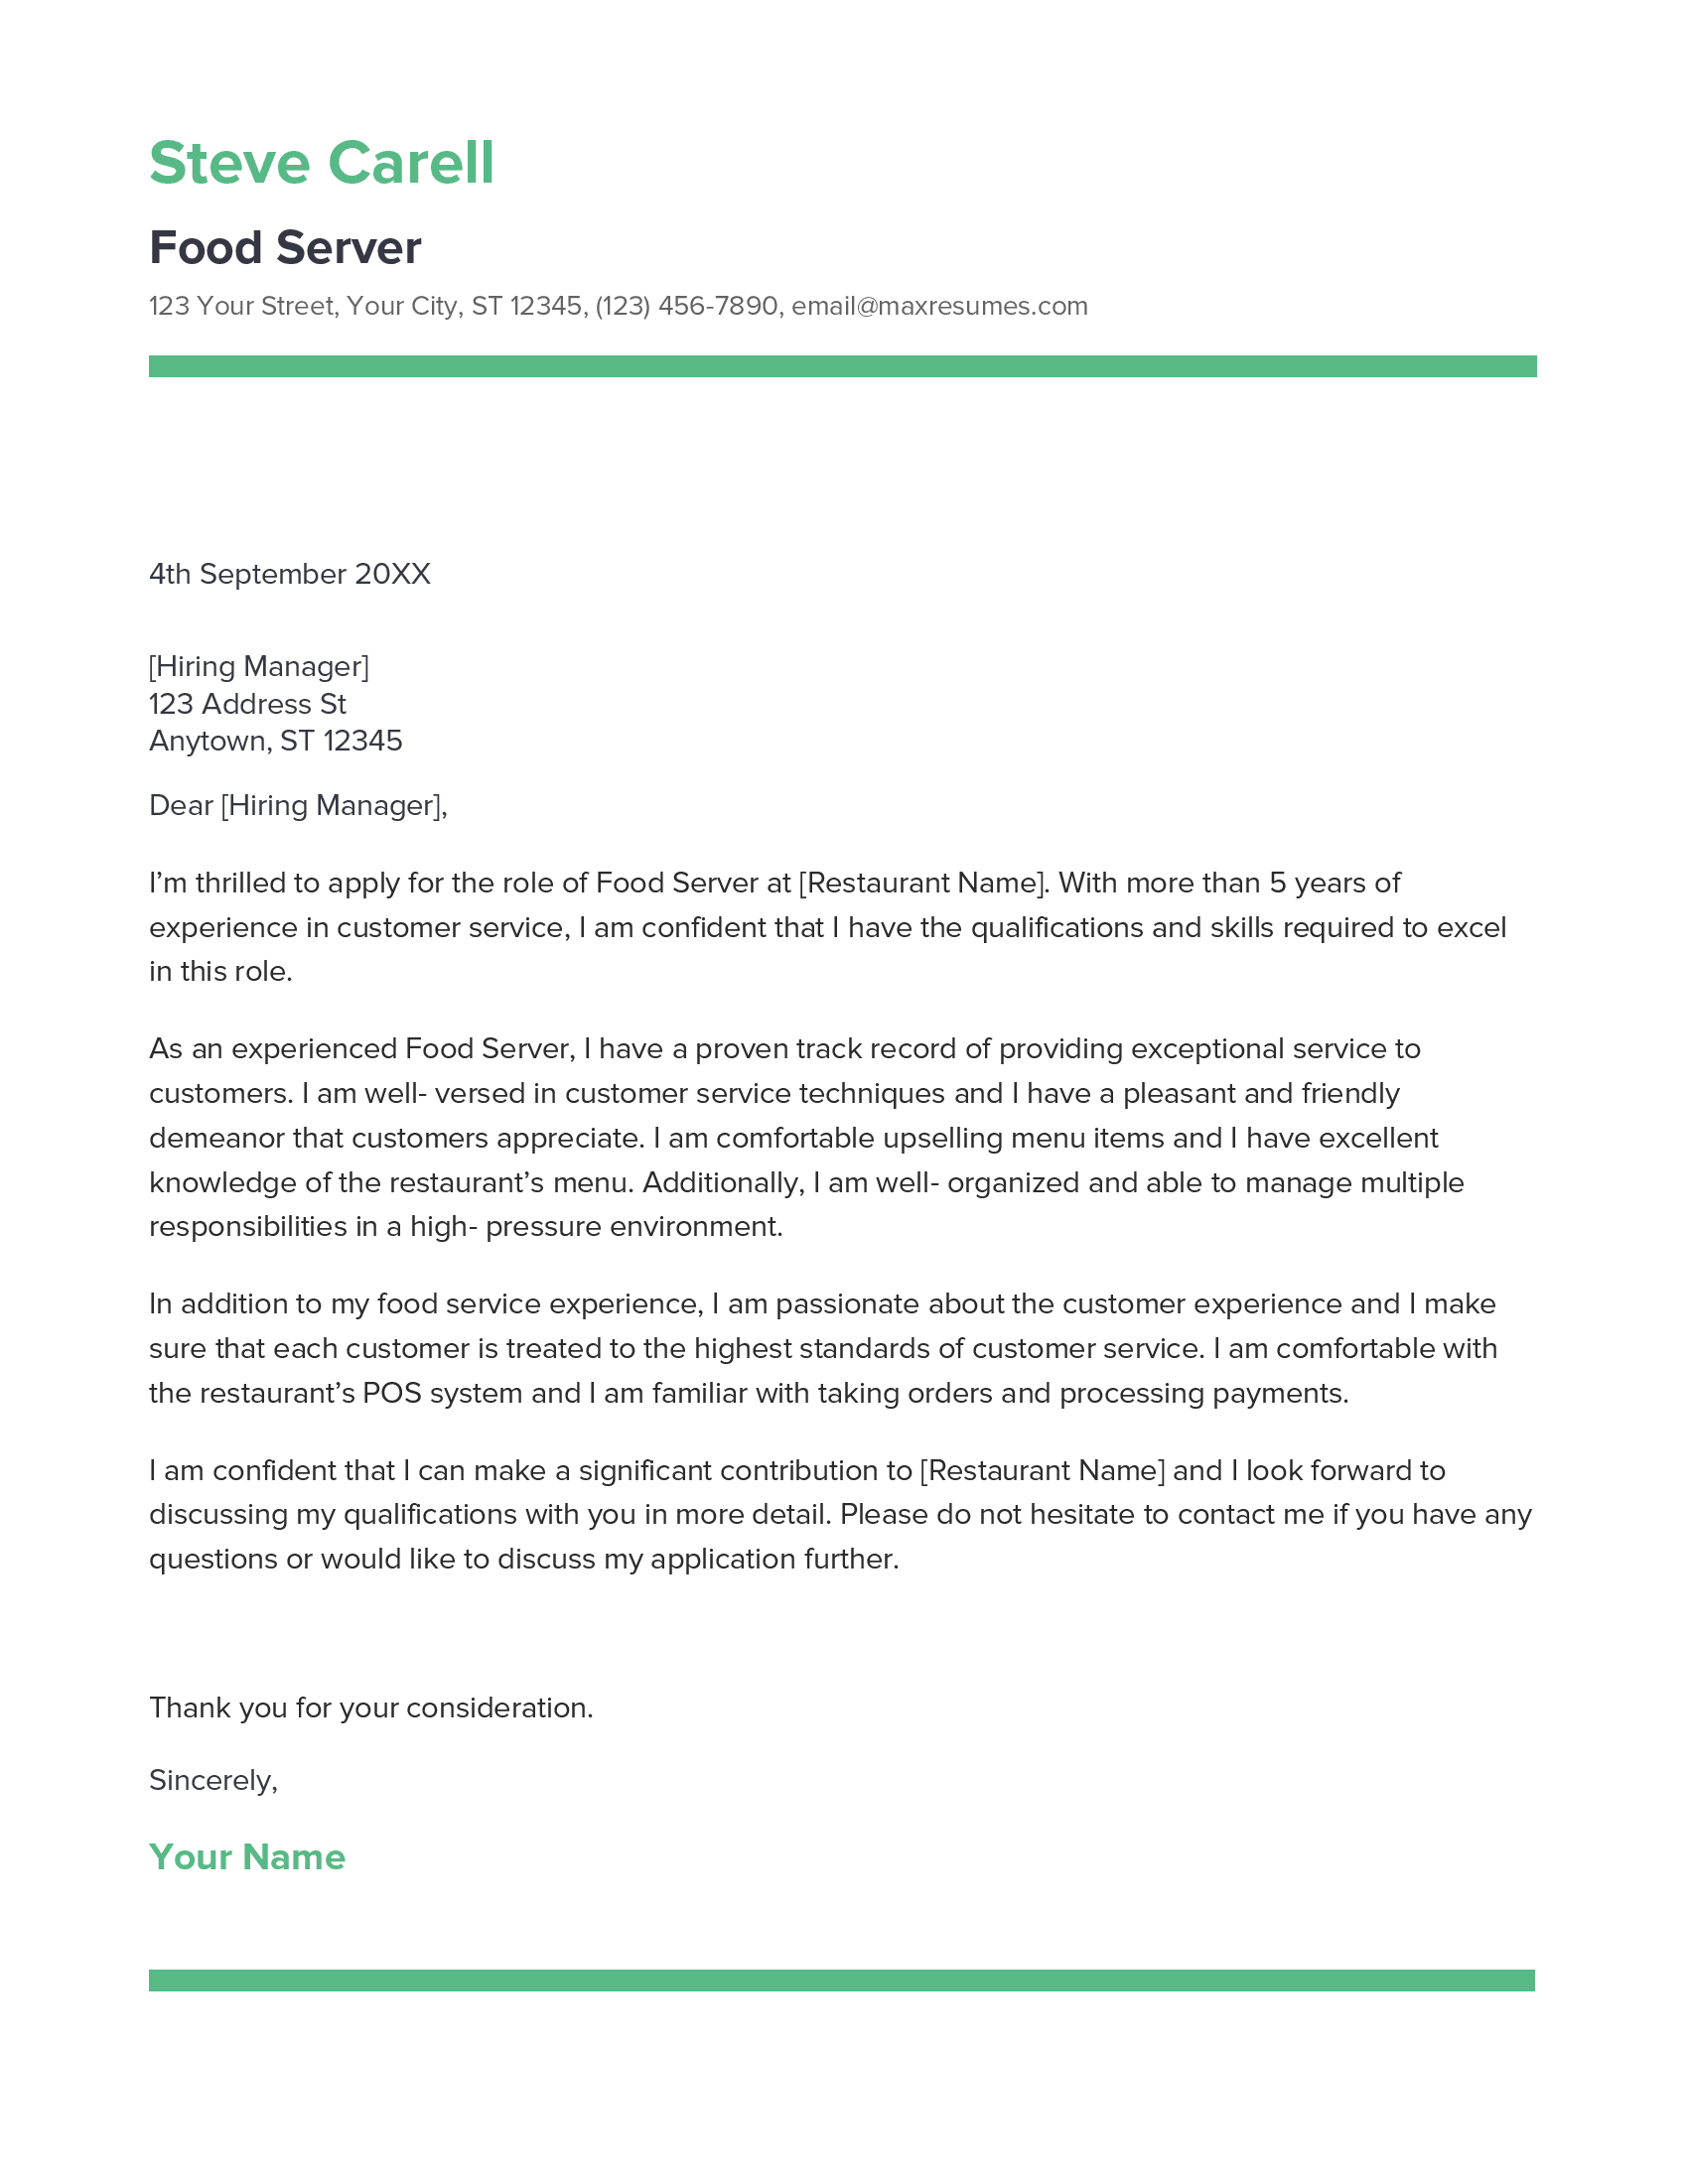 Food Server Cover Letter Example